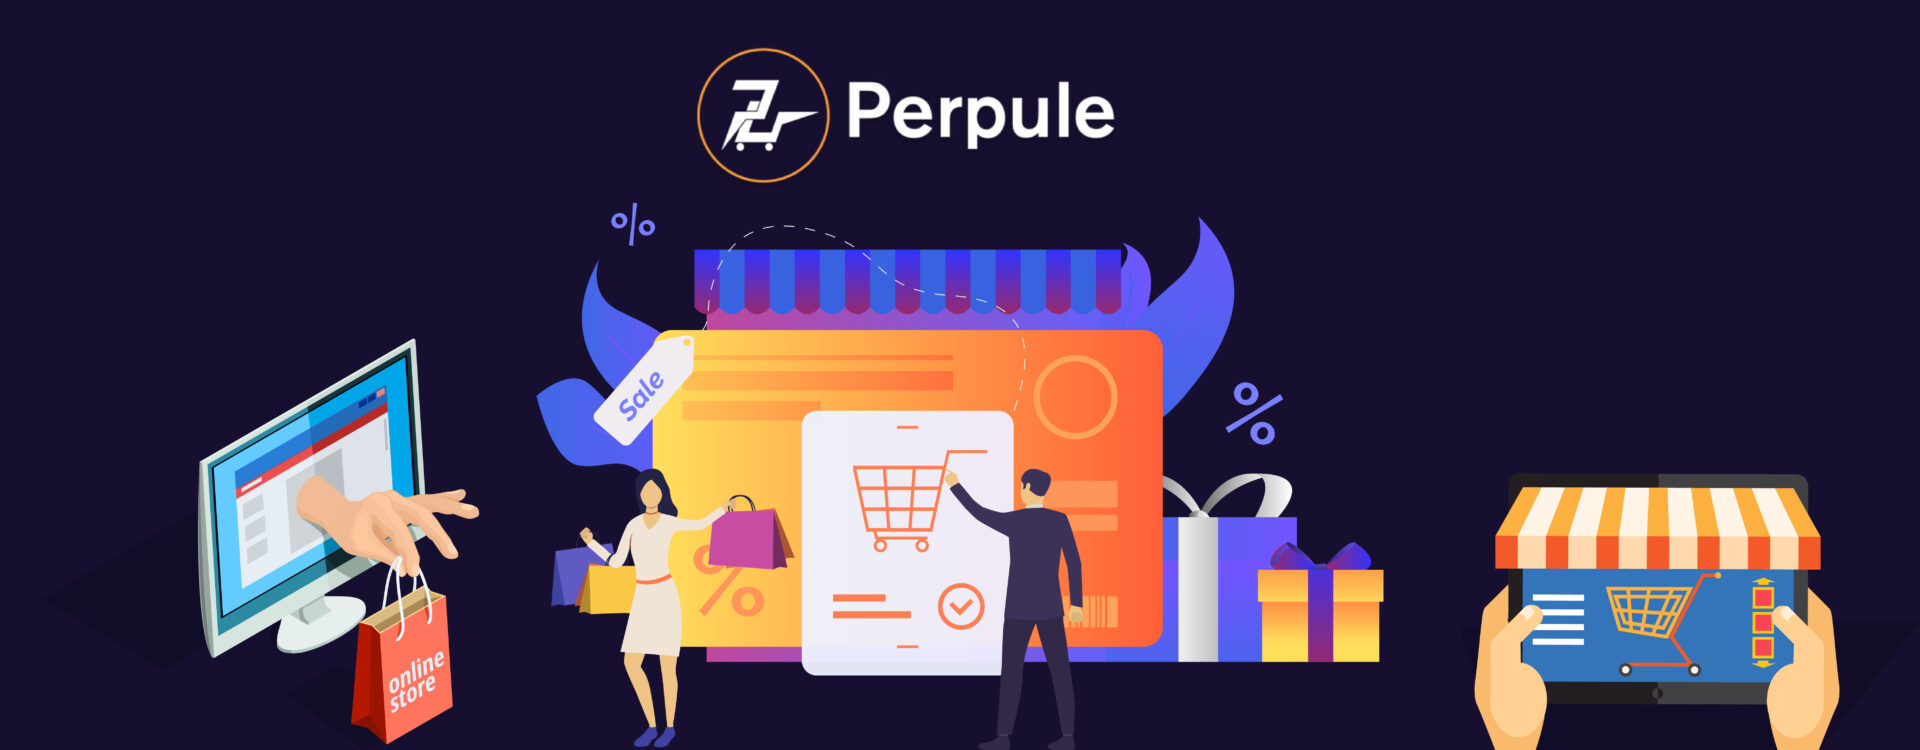 Perpule, the retail tech start-up, was acquired by Amazon in March